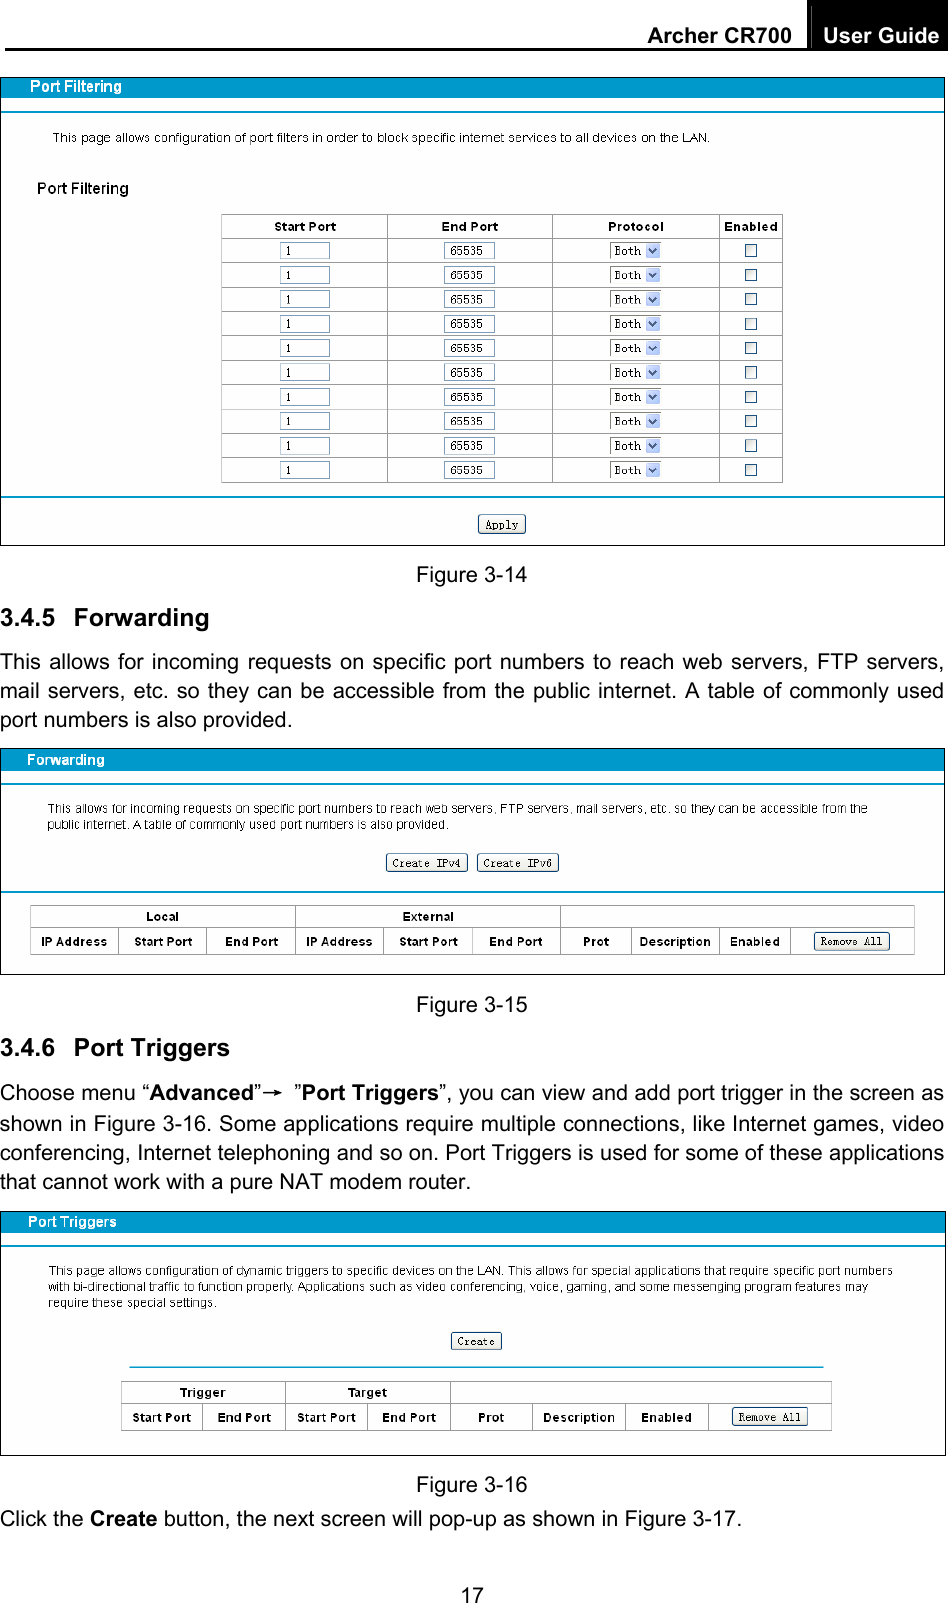 Archer CR700  User Guide 17  Figure 3-14 3.4.5  Forwarding This allows for incoming requests on specific port numbers to reach web servers, FTP servers, mail servers, etc. so they can be accessible from the public internet. A table of commonly used port numbers is also provided.  Figure 3-15 3.4.6  Port Triggers Choose menu “Advanced”→ ”Port Triggers”, you can view and add port trigger in the screen as shown in Figure 3-16. Some applications require multiple connections, like Internet games, video conferencing, Internet telephoning and so on. Port Triggers is used for some of these applications that cannot work with a pure NAT modem router.    Figure 3-16 Click the Create button, the next screen will pop-up as shown in Figure 3-17. 